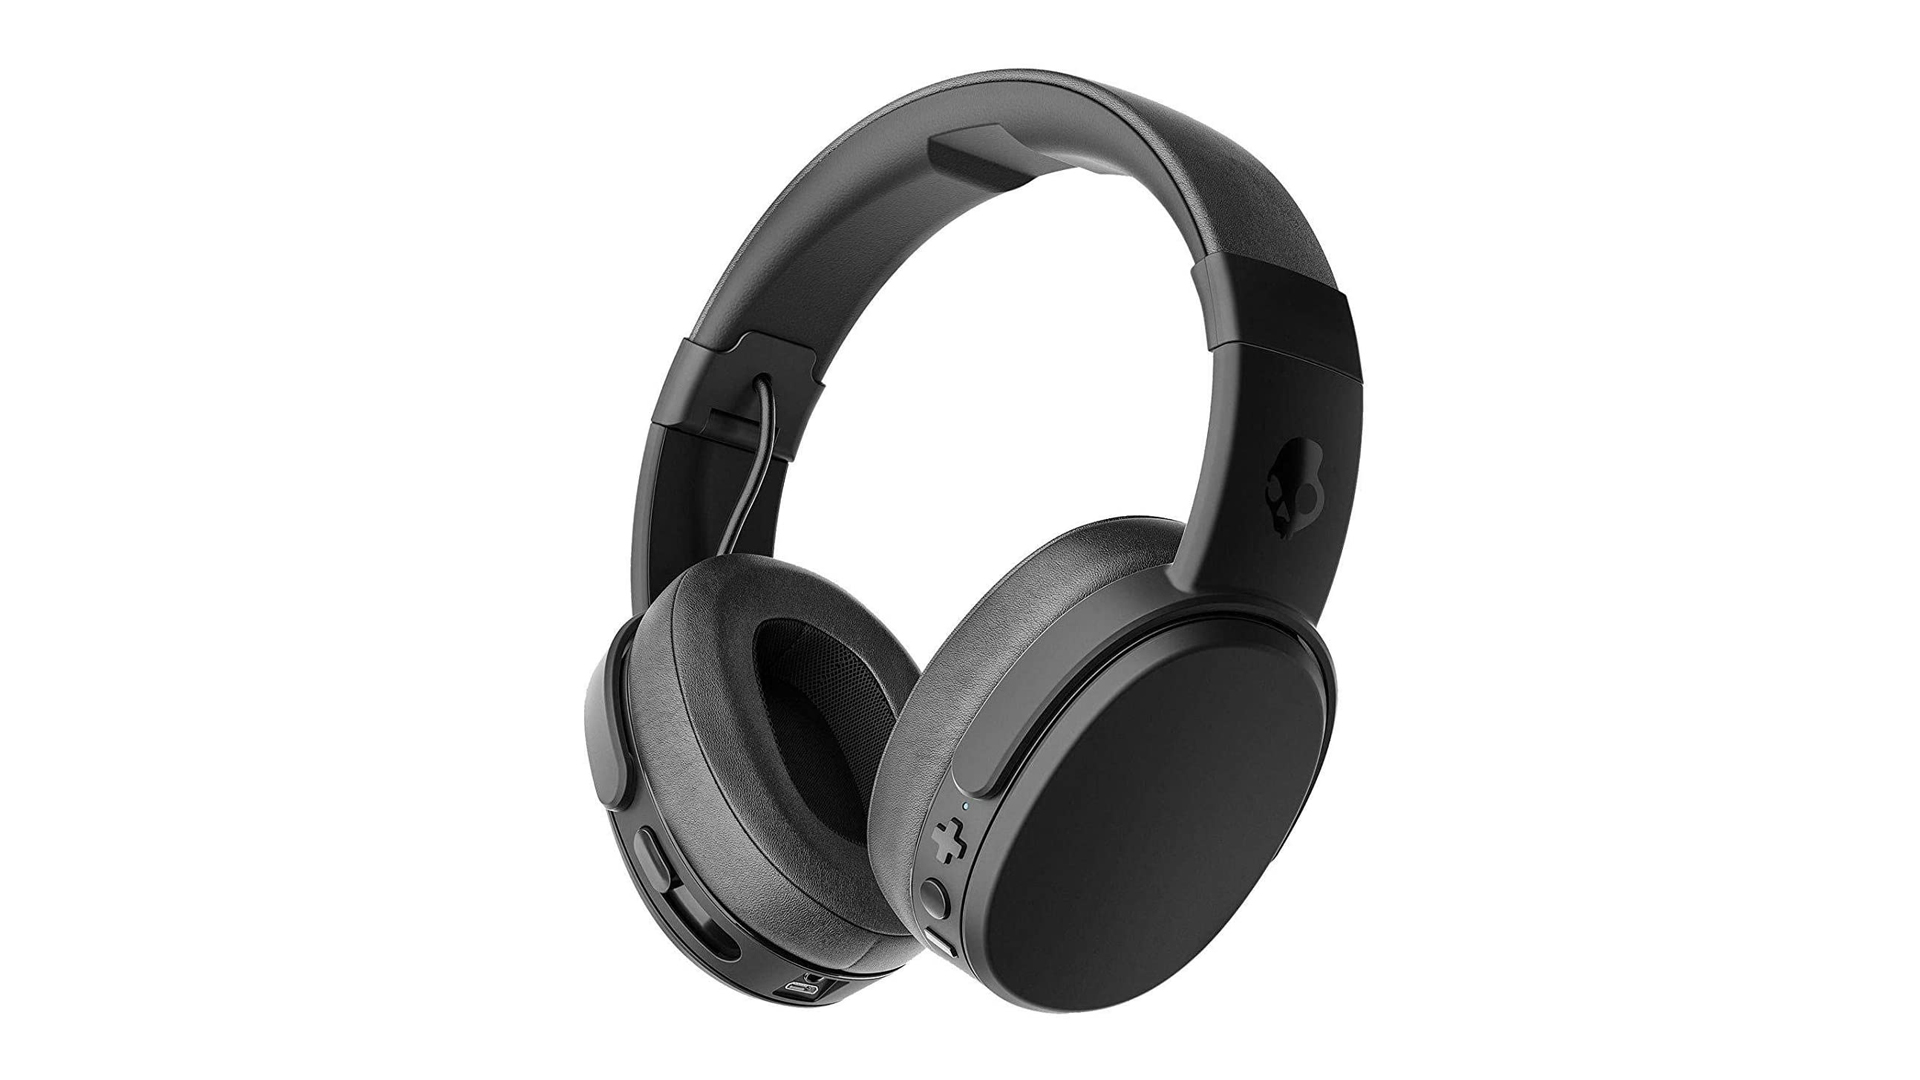 The Skullcandy Crusher Wireless in black against a white background.